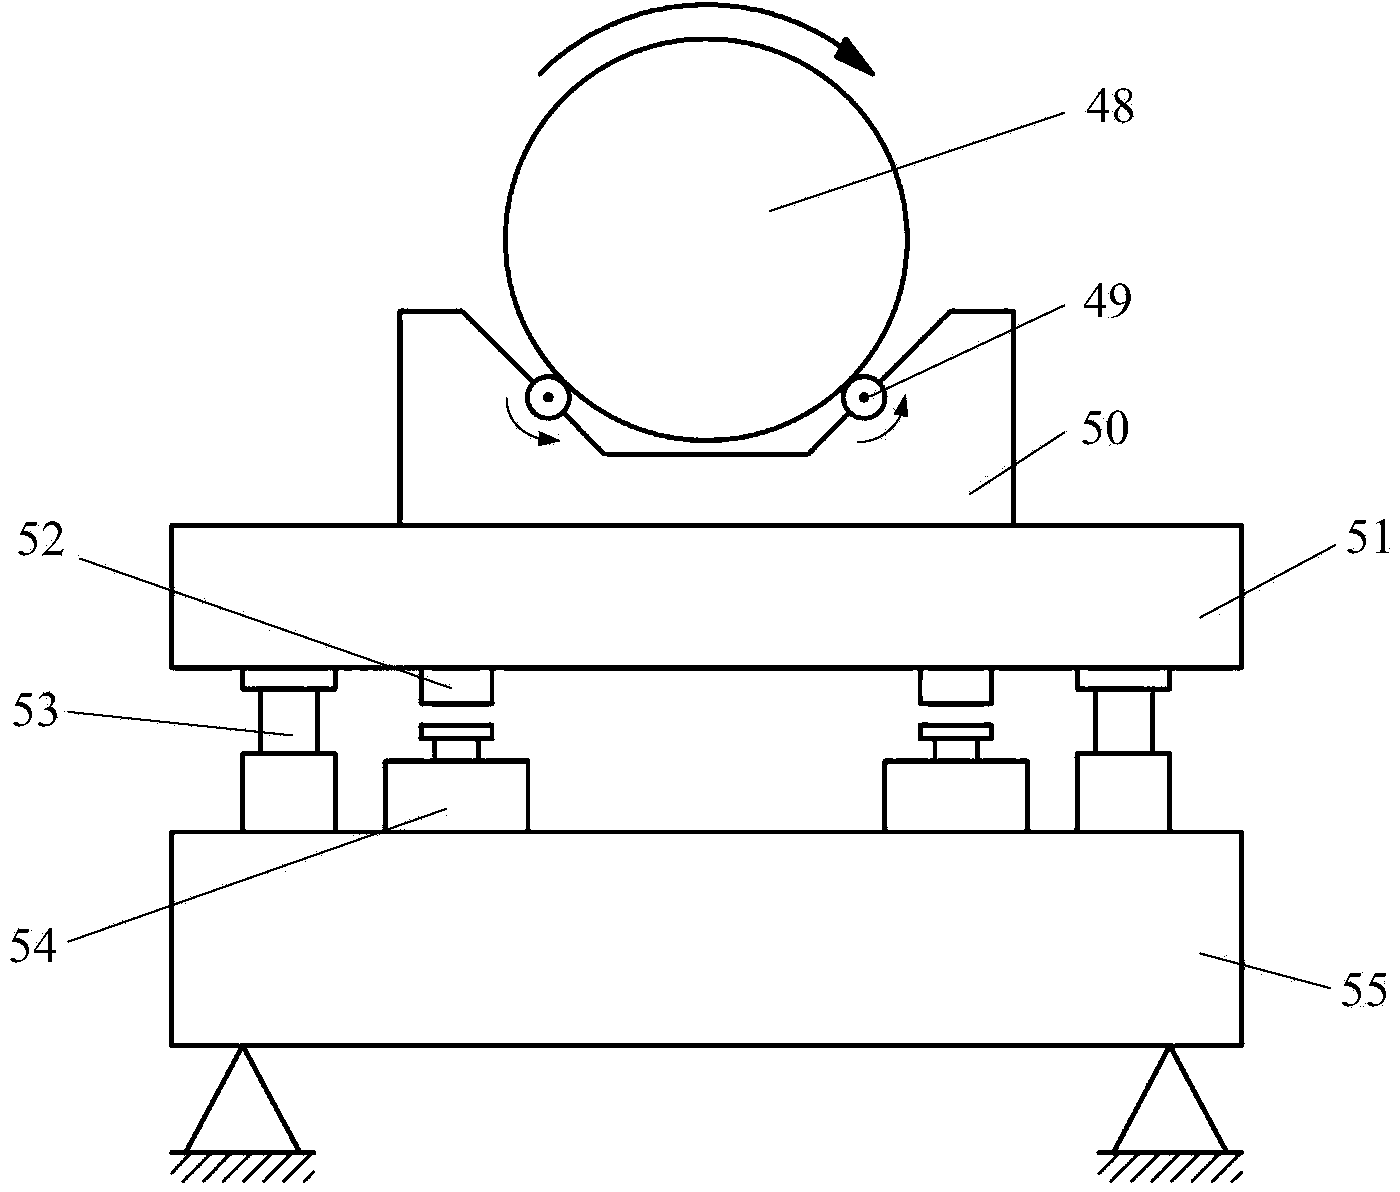 Mass and mass center measuring device for guided missile in irregular shape